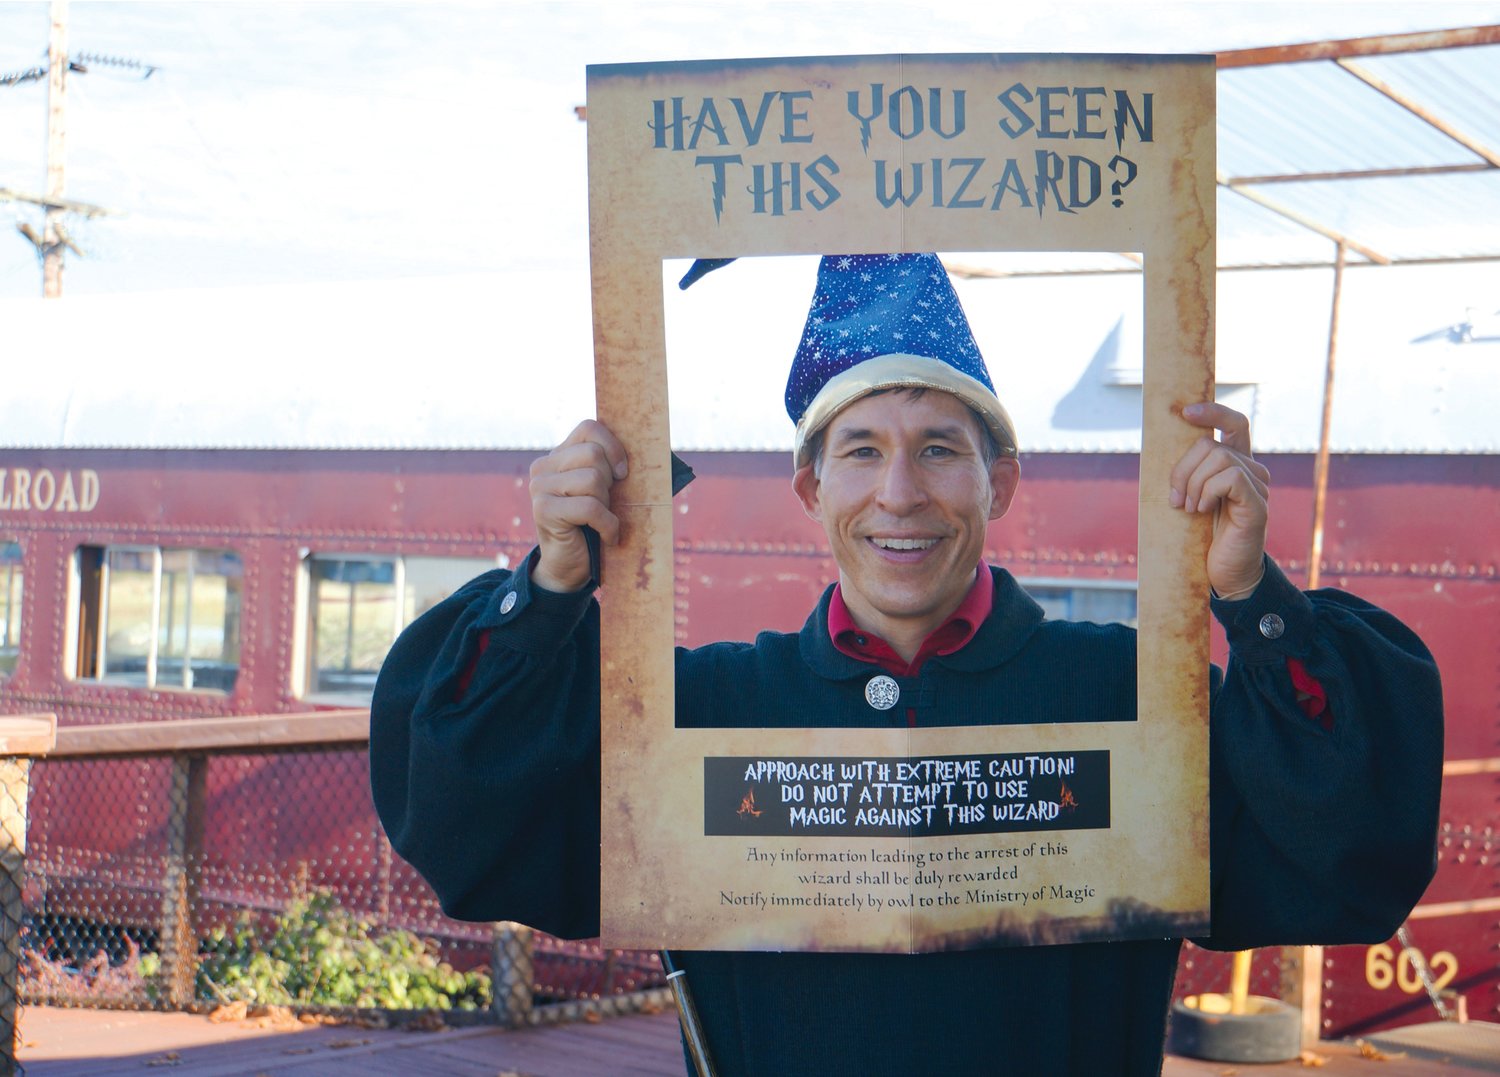 The event will feature award-winning magician Jeff Evans, who will teach “mystic arts” while participants prove their prowess and boast their best at trivia and adventure games in the 1920s historic railroad coaches.